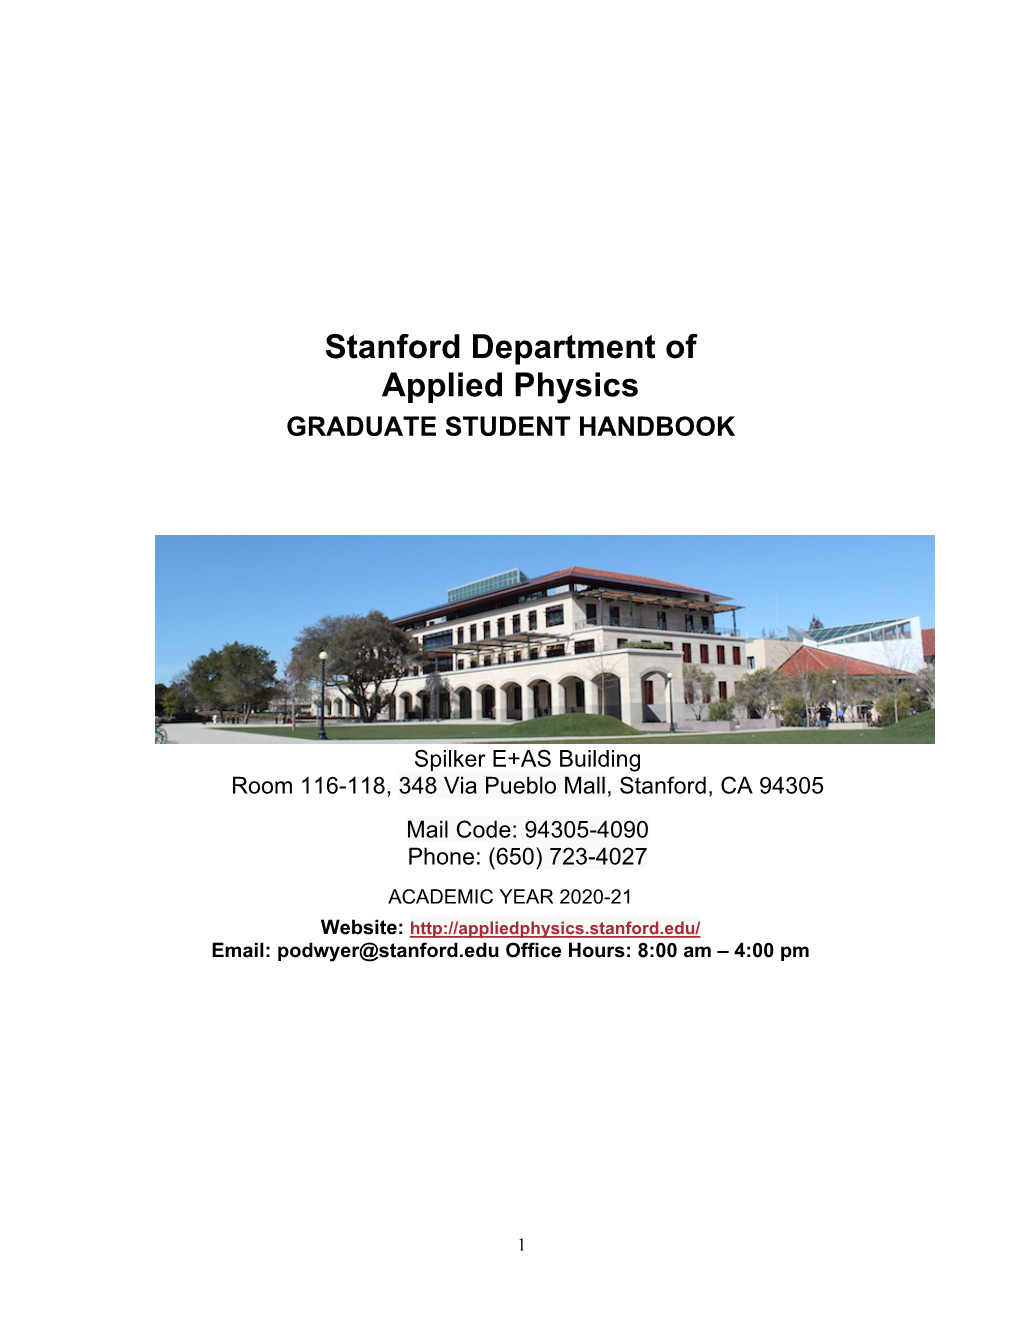 Stanford Department of Applied Physics GRADUATE STUDENT HANDBOOK